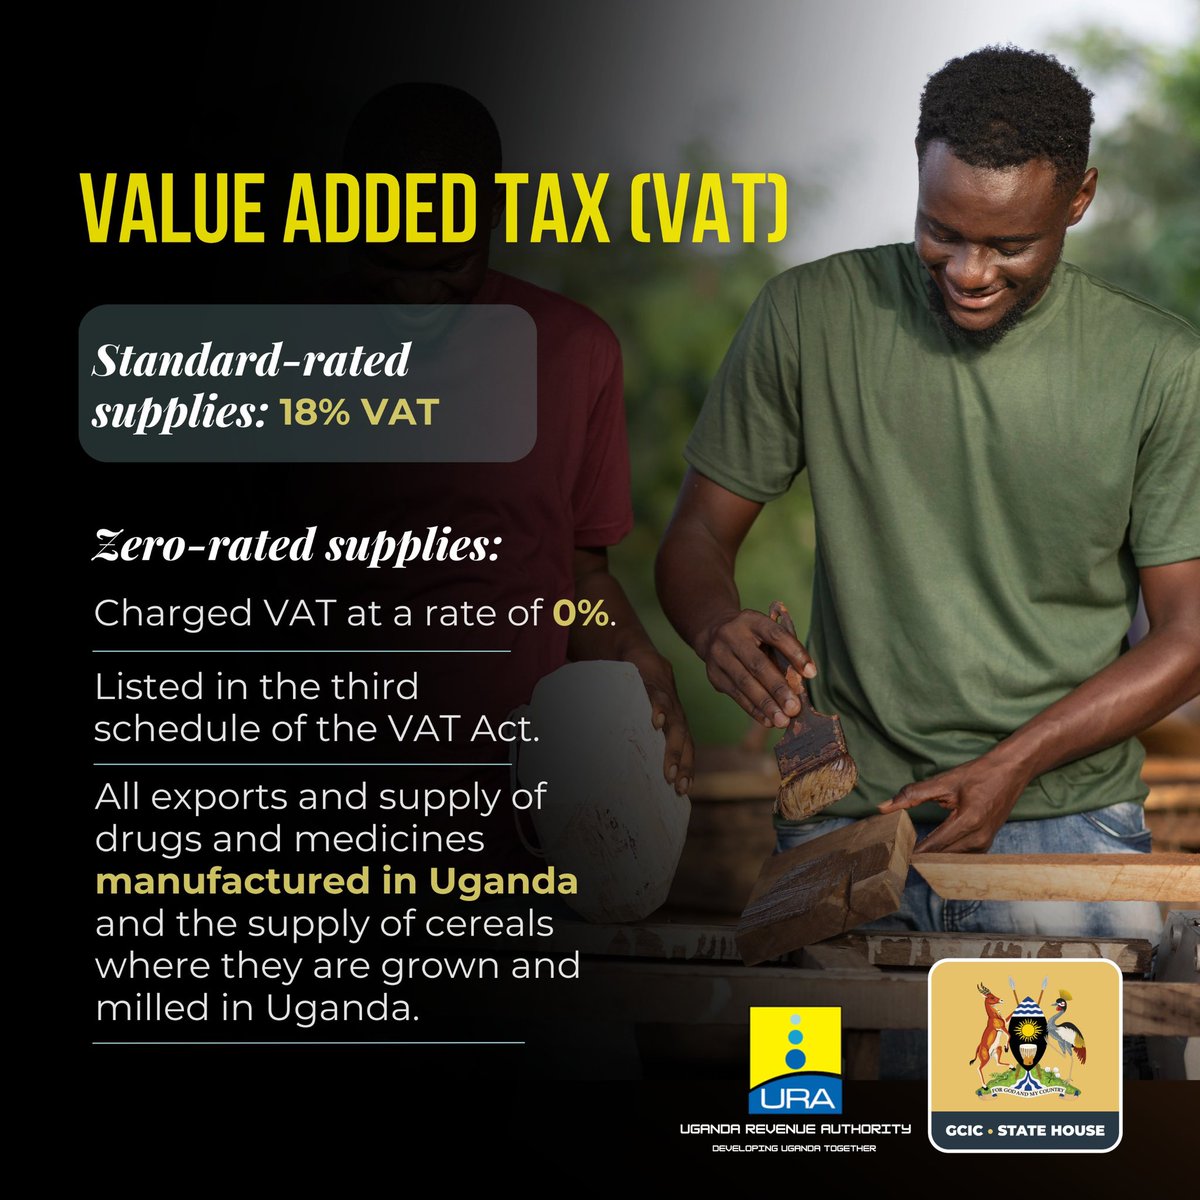 𝐙𝐞𝐫𝐨-𝐫𝐚𝐭𝐞𝐝 VAT 𝐬𝐮𝐩𝐩𝐥𝐢𝐞𝐬: Applies to exports and supply of drugs and medicines manufactured in Uganda and the supply of cereals where they are grown and milled in Uganda. #UgEconomy #OpenGovUg